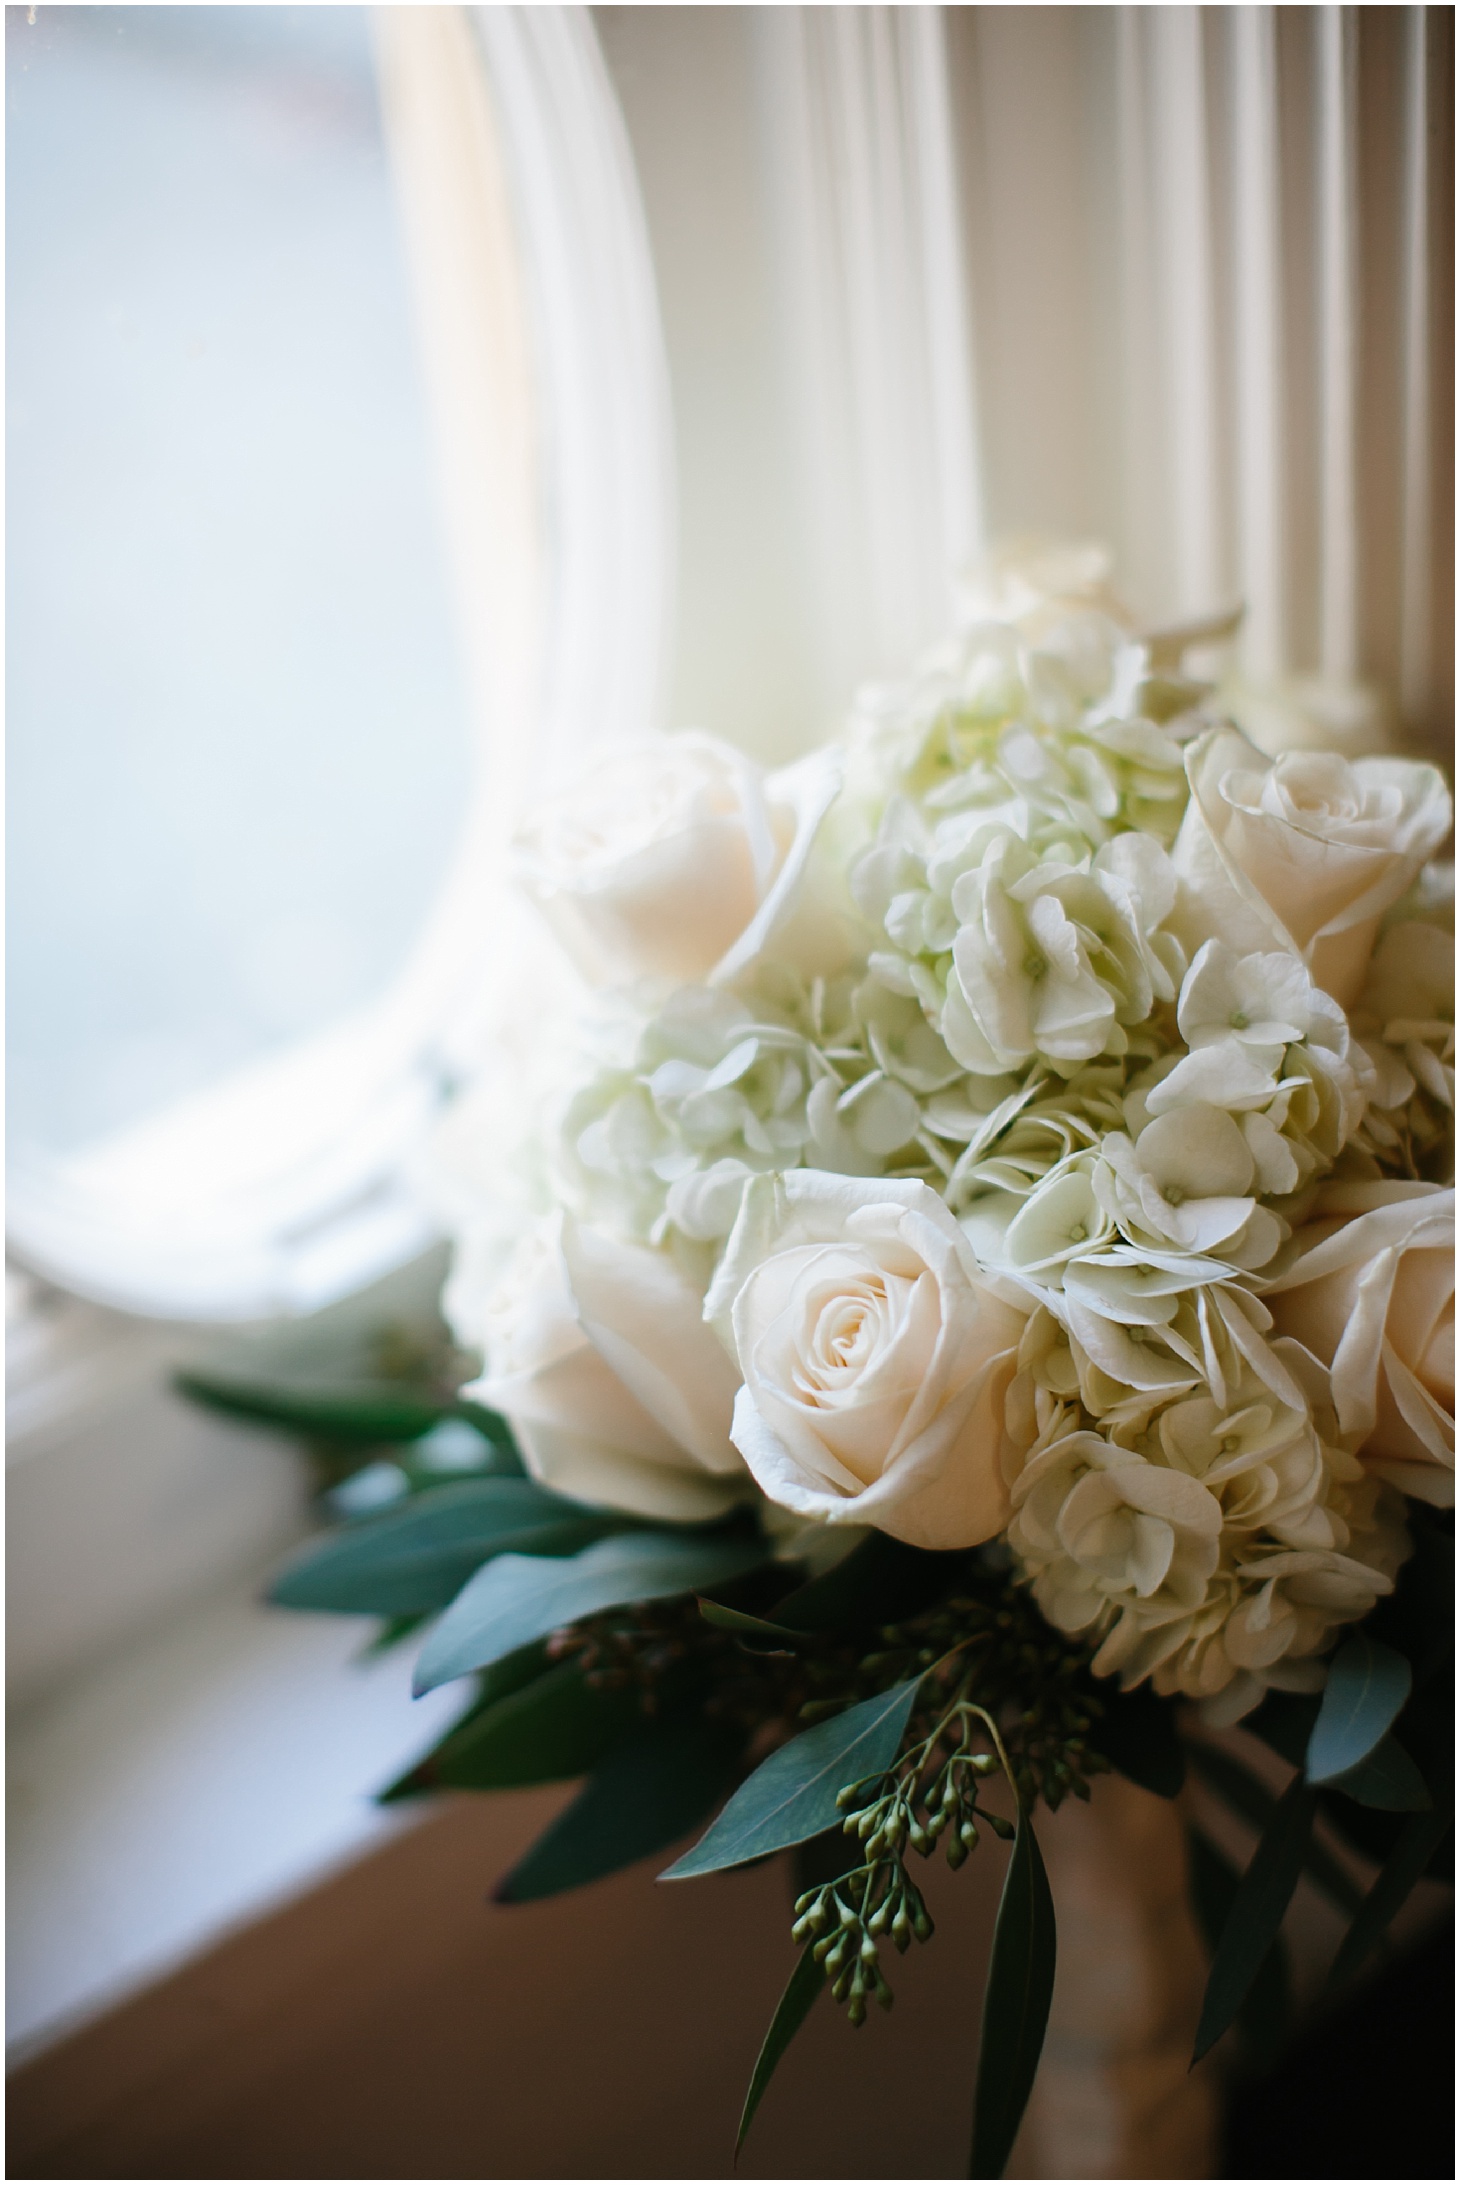 Classic Southern Rust Manor House Wedding